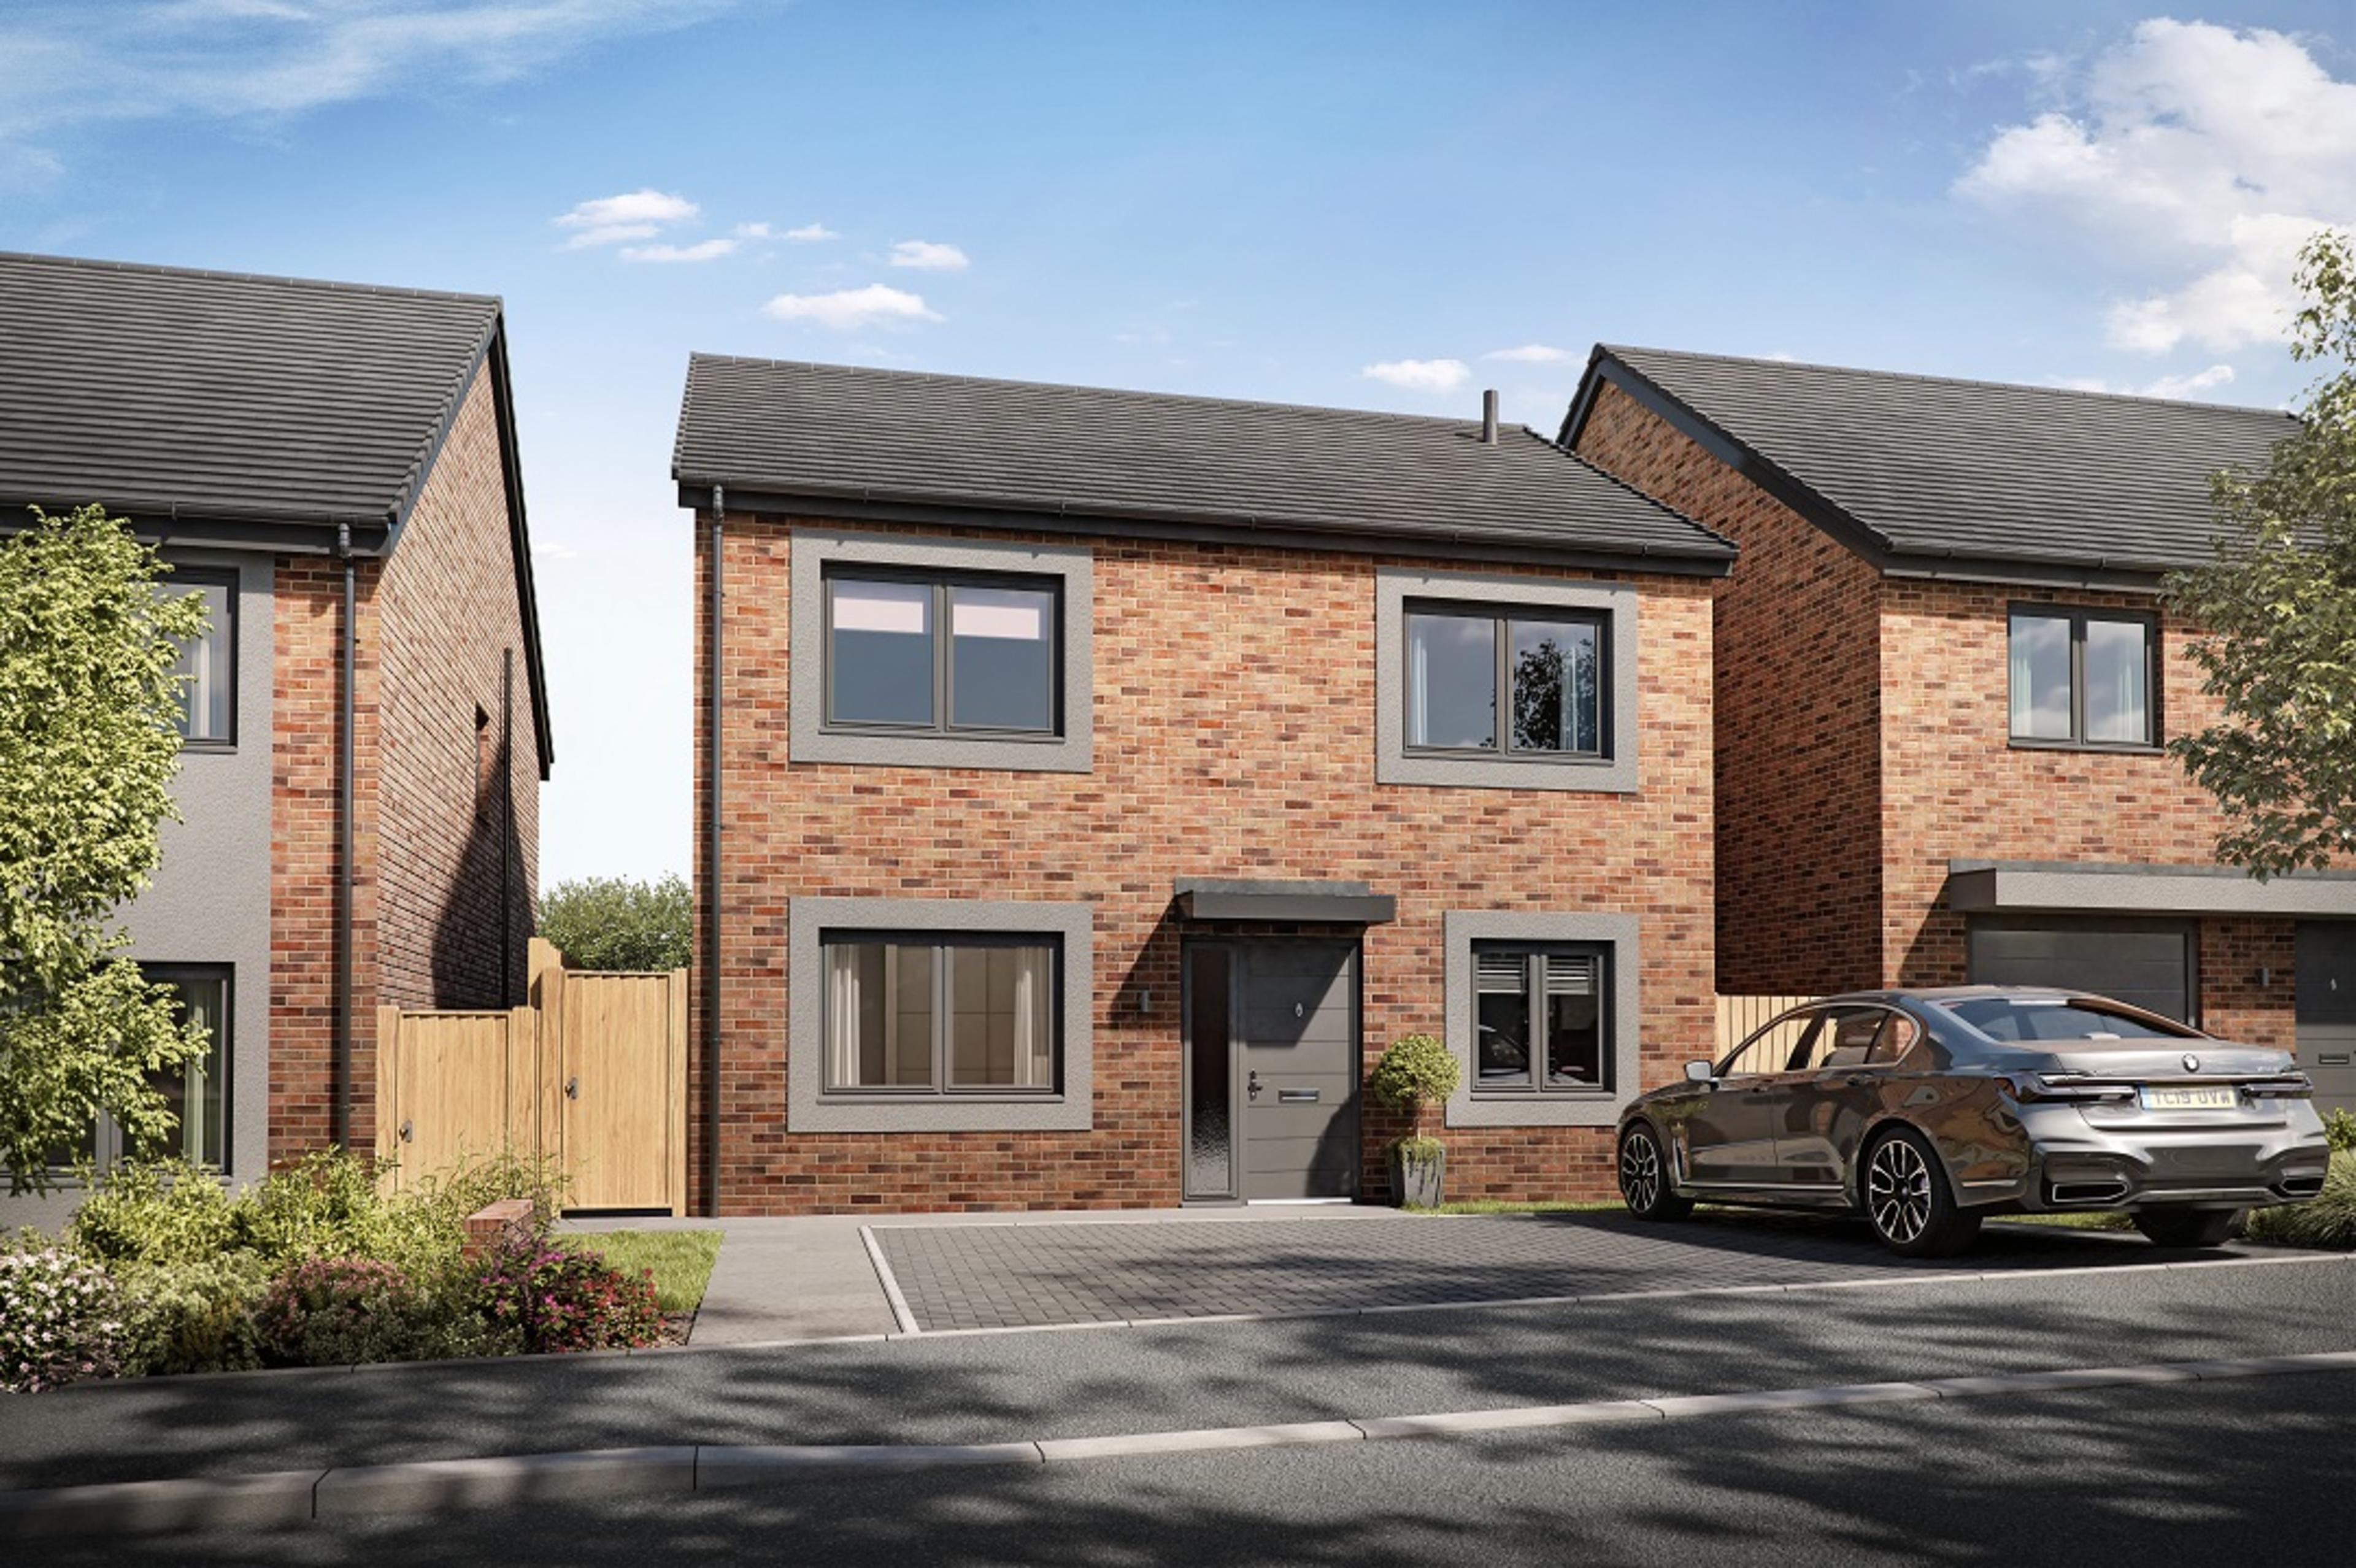 Woolner-Brook-Peacock-4-bed-new-build-detached